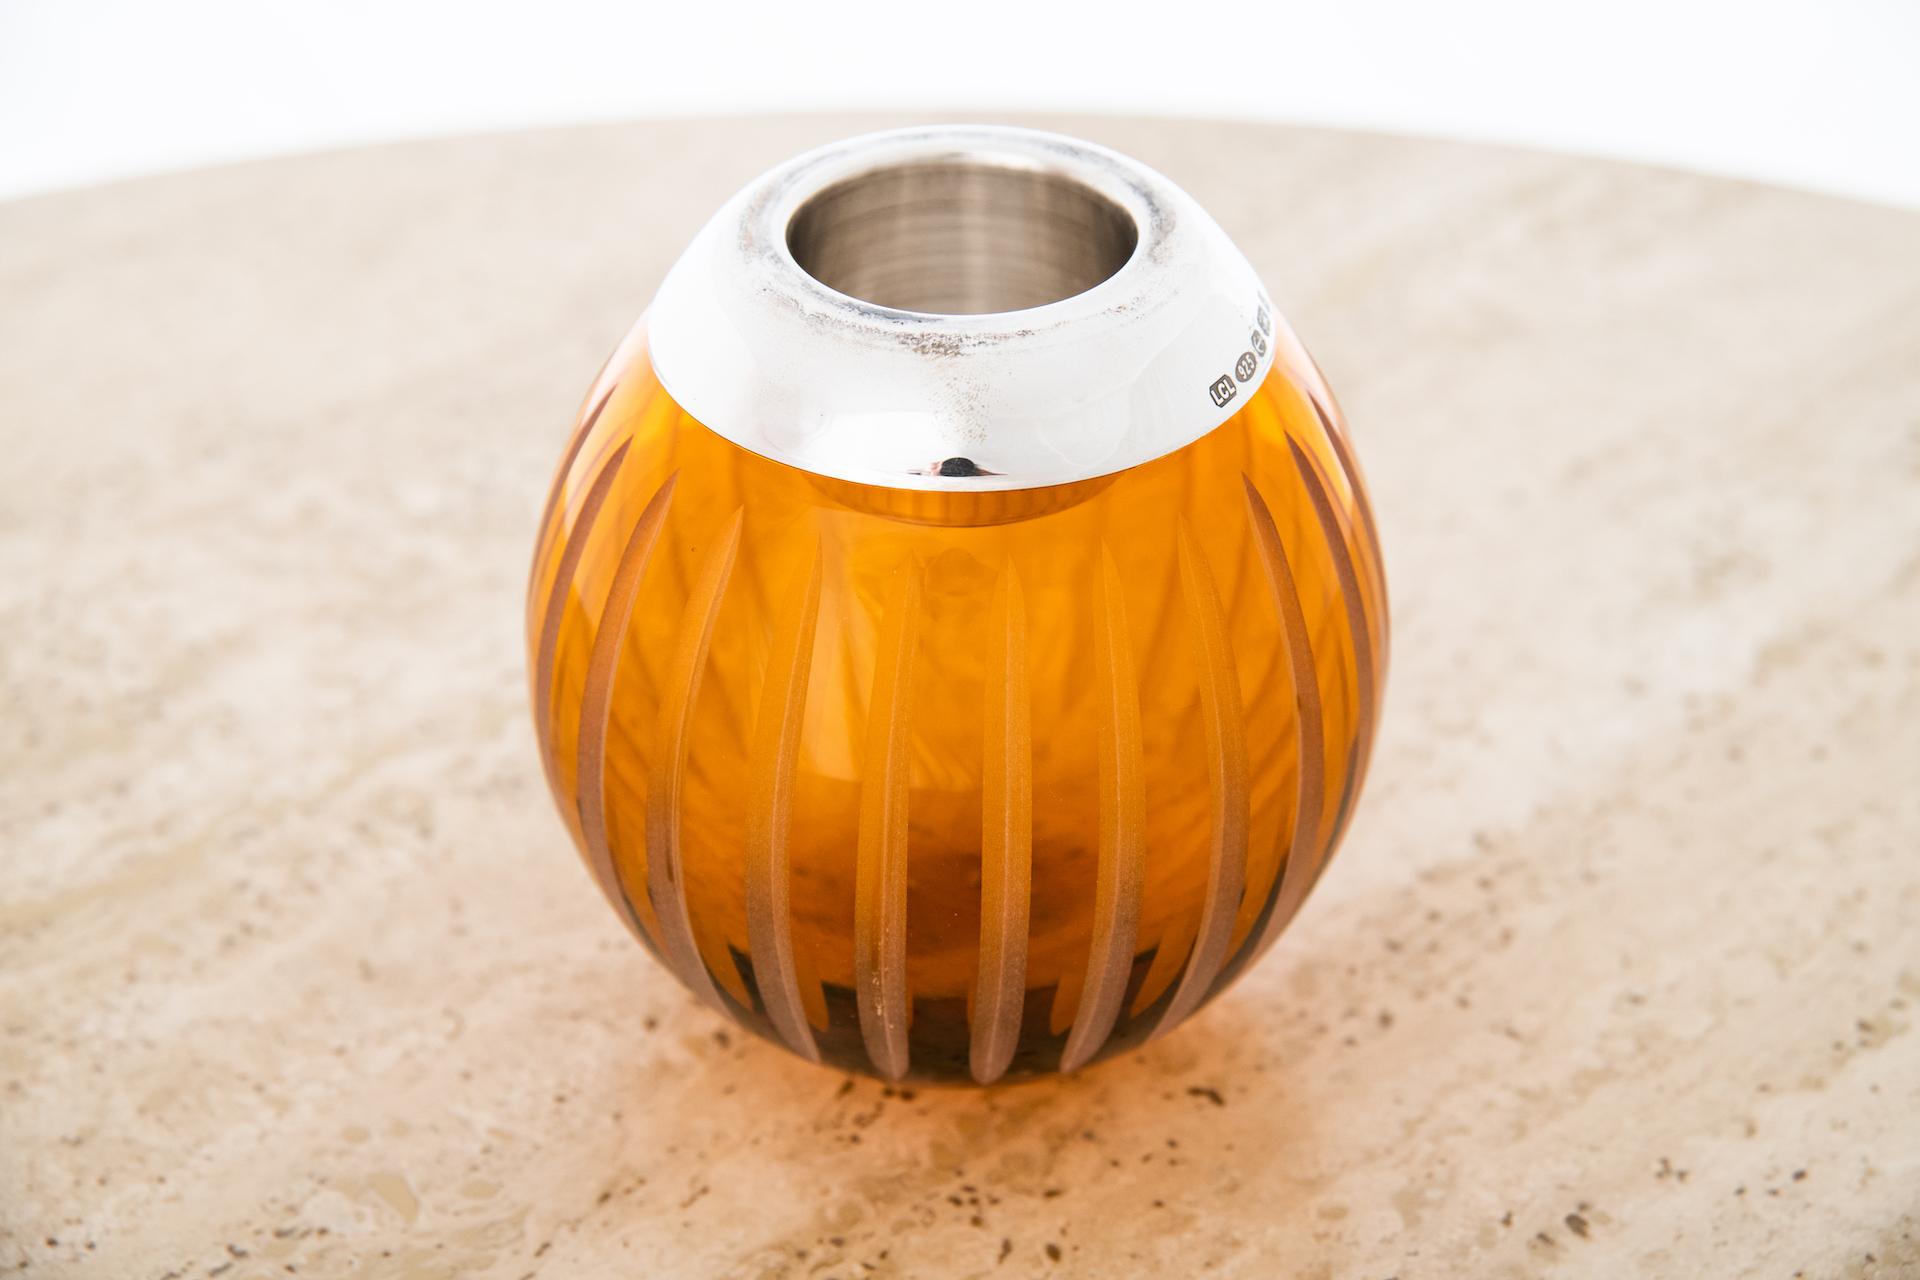 A medium mouth-blown crystal match strike in orange. The sterling silver rim is marked with the British silver assay marks for Birmingham, England. The repeating decorative cut and etched “splits” function as the striking surface for matches.